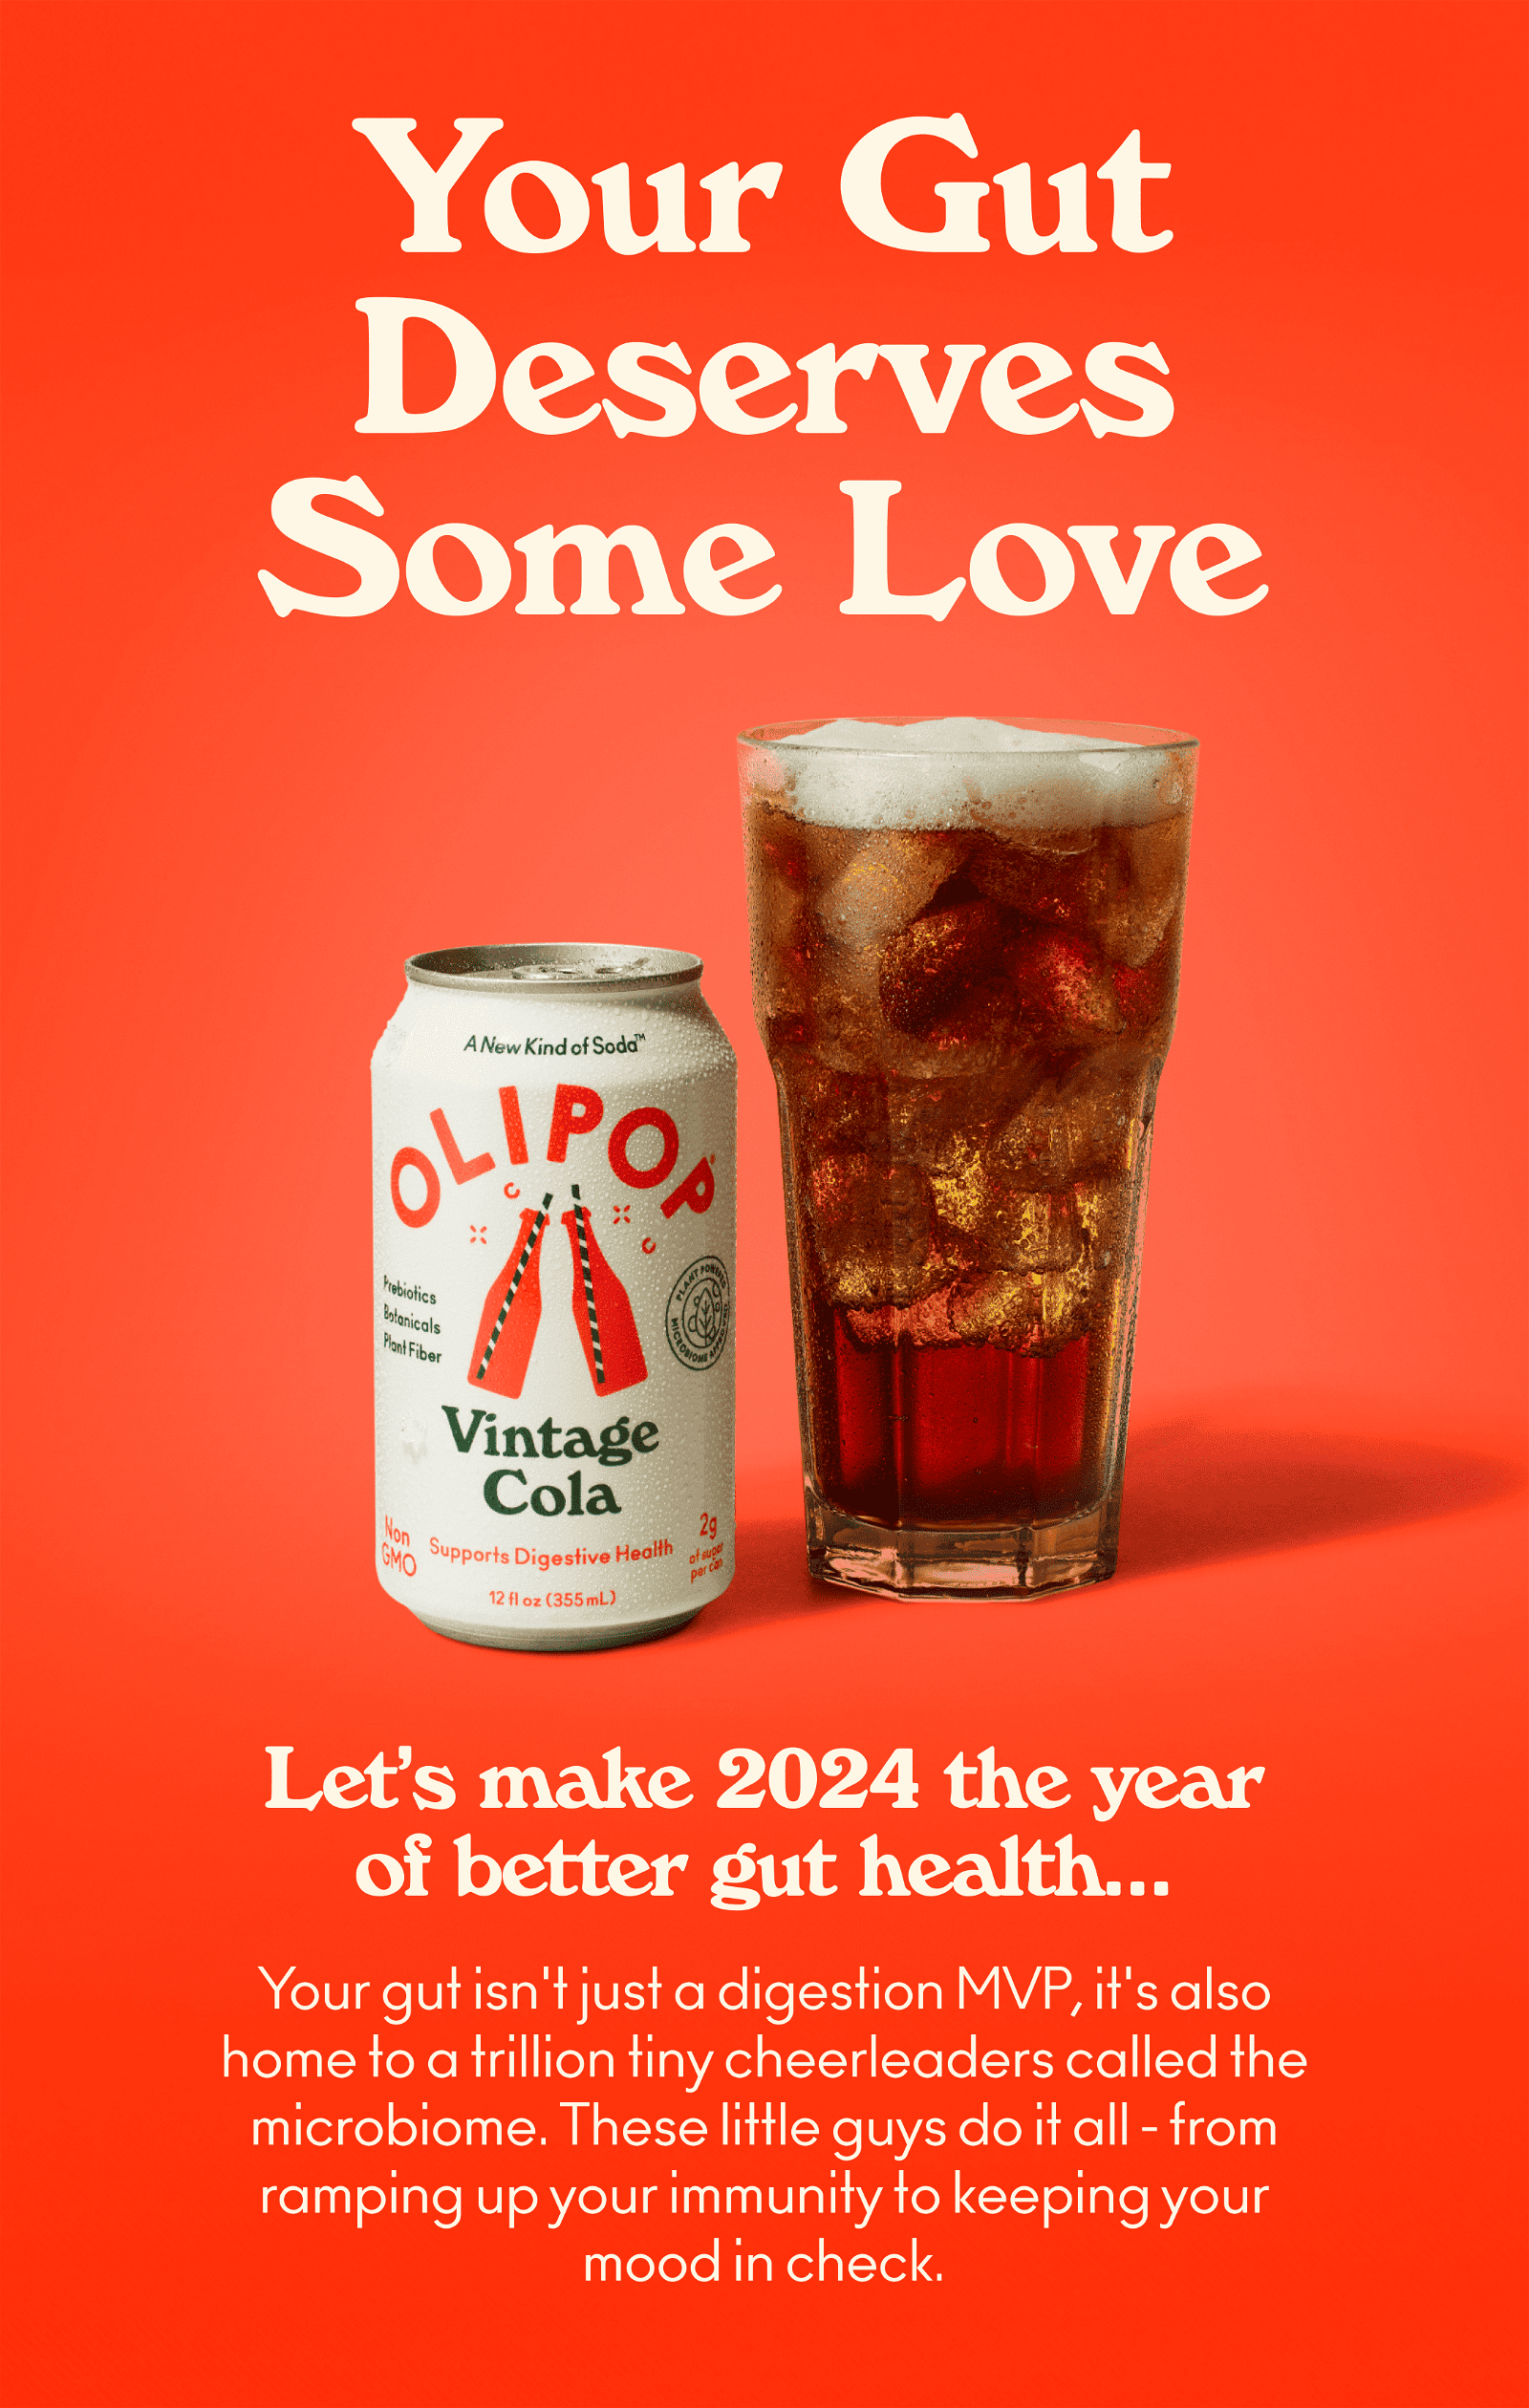 Your gut deserves some love. It isn't just a digestion MVP, it's also home to a trillion tiny cheerleaders called the microbiome. These little guys do it all - from ramping up your immunity to keeping your mood in check.